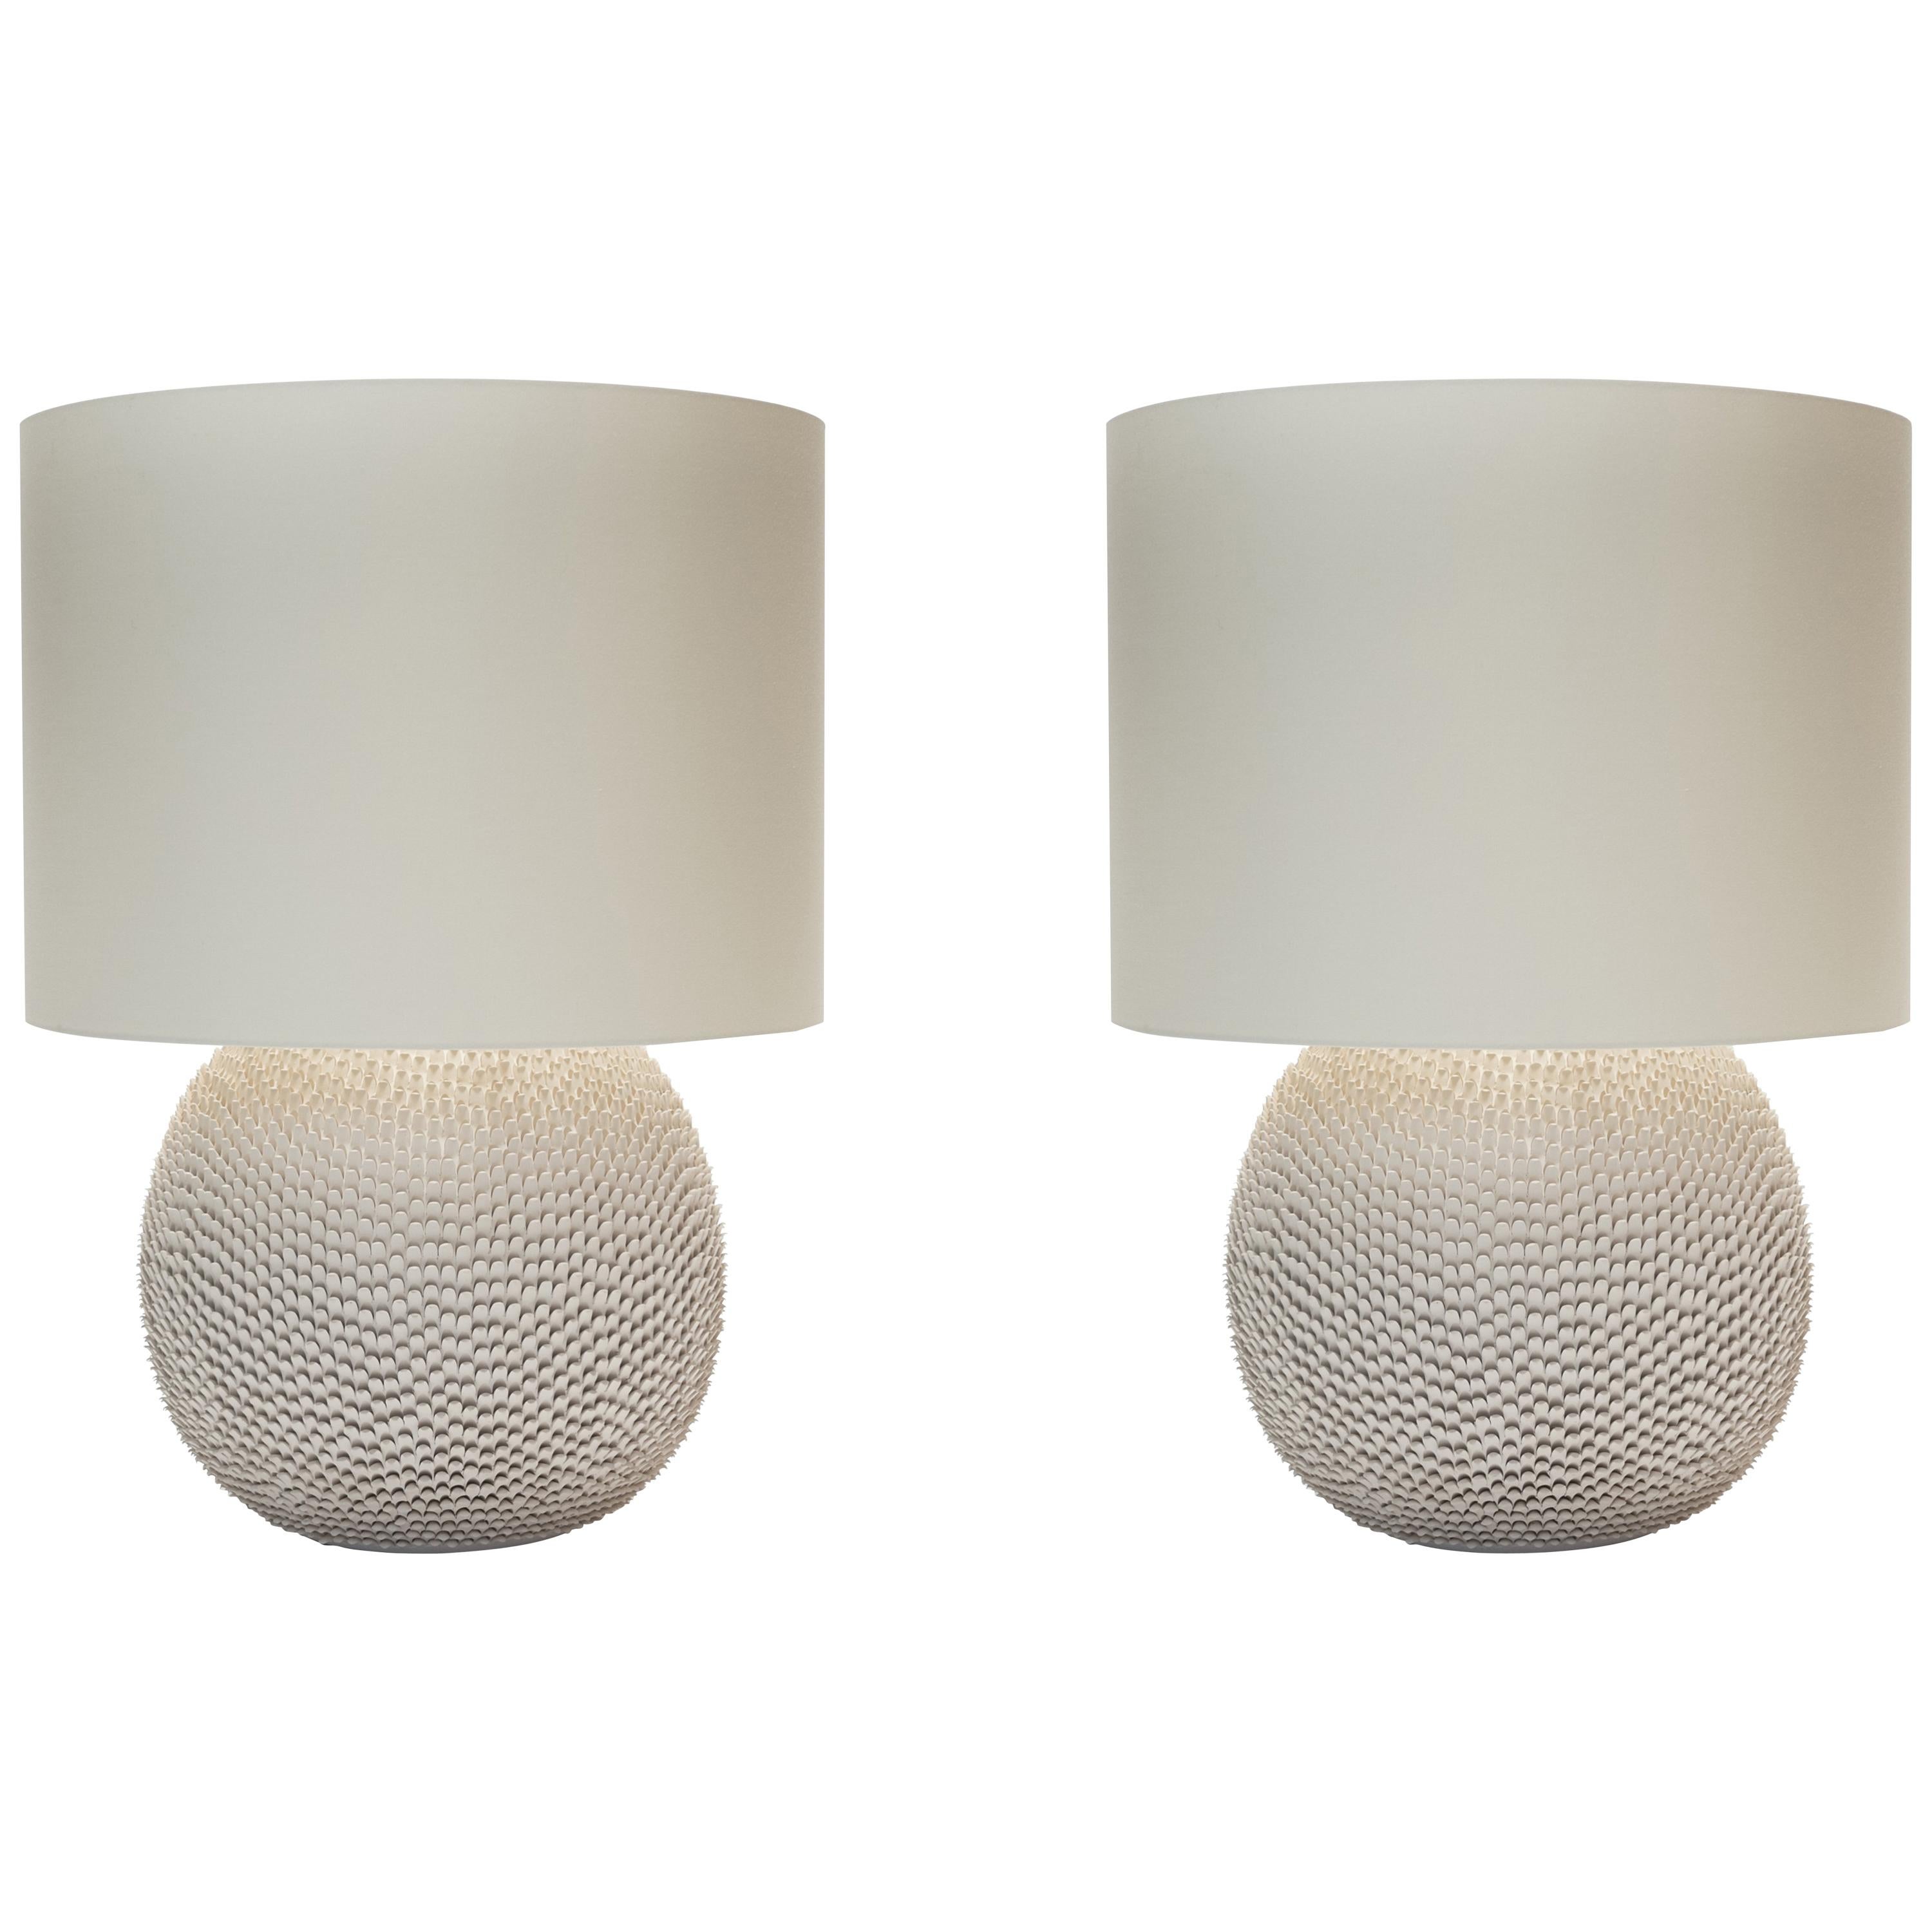 Pair of Round Modern Ceramic Table Lamps